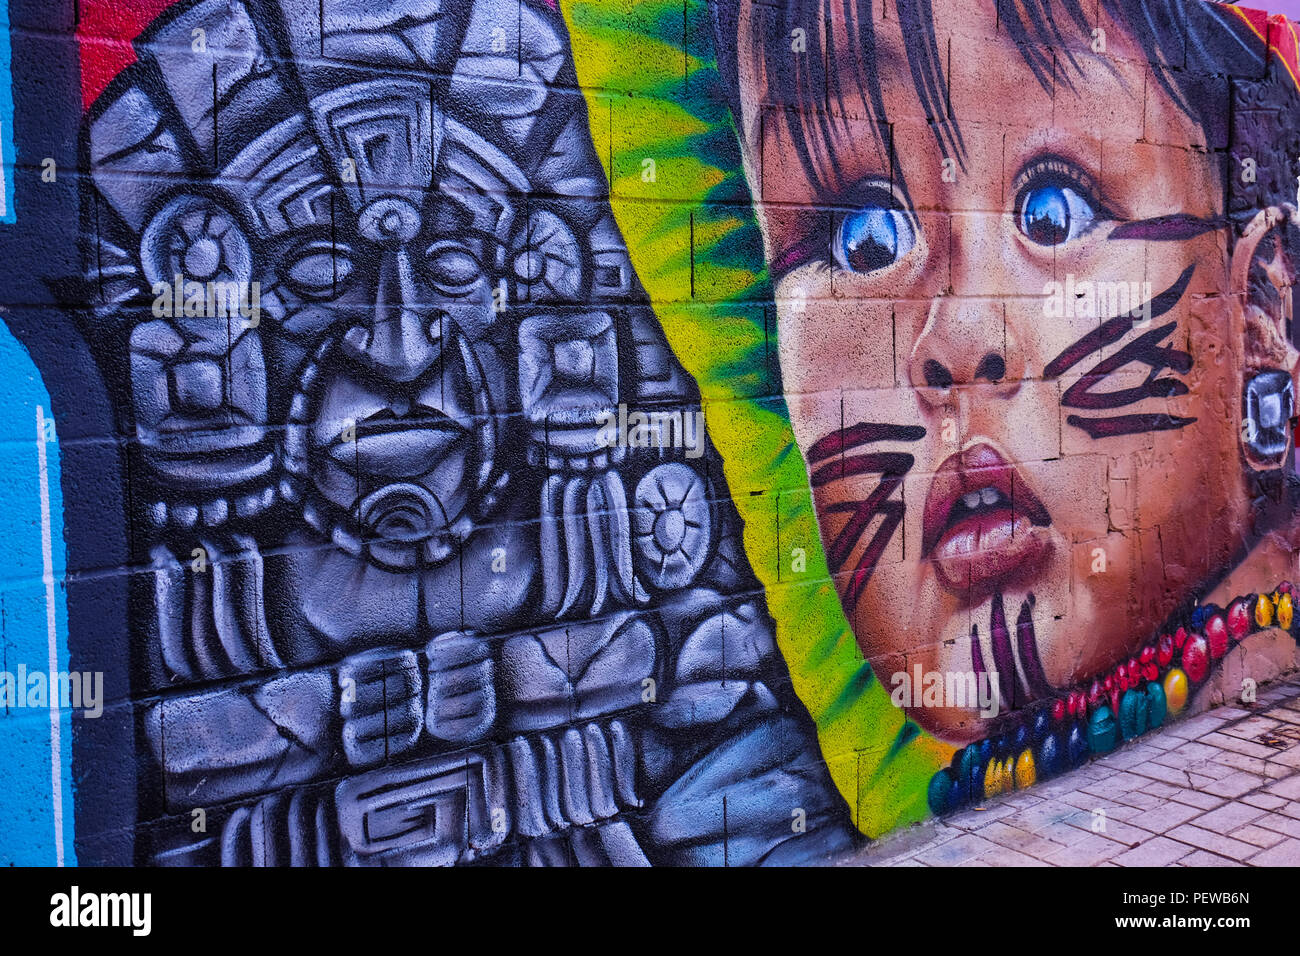 View of colorful street art, a small kid and Mayan symbols, shot in the streets of Malaga in Andalusia, Spain, near the plaza de la Merced Stock Photo